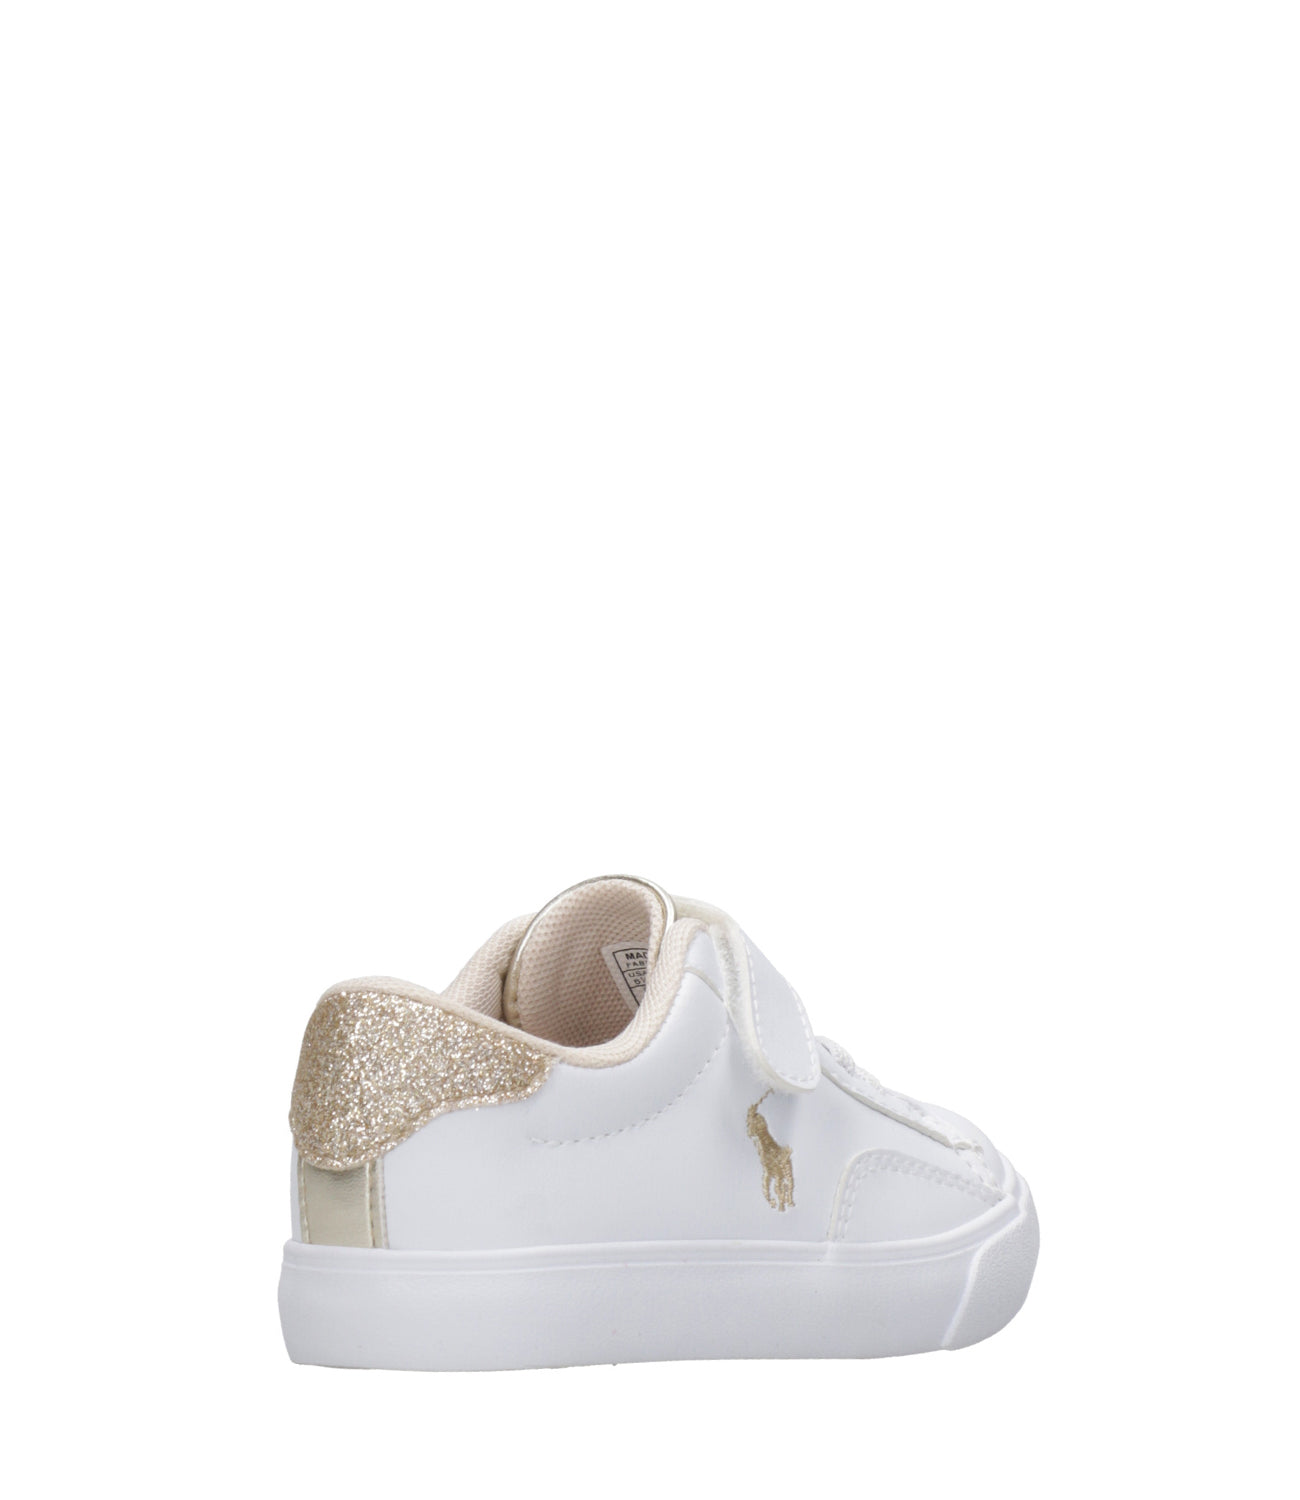 Ralph Lauren Childrenswear | Sneakers Theron V PS White and Gold